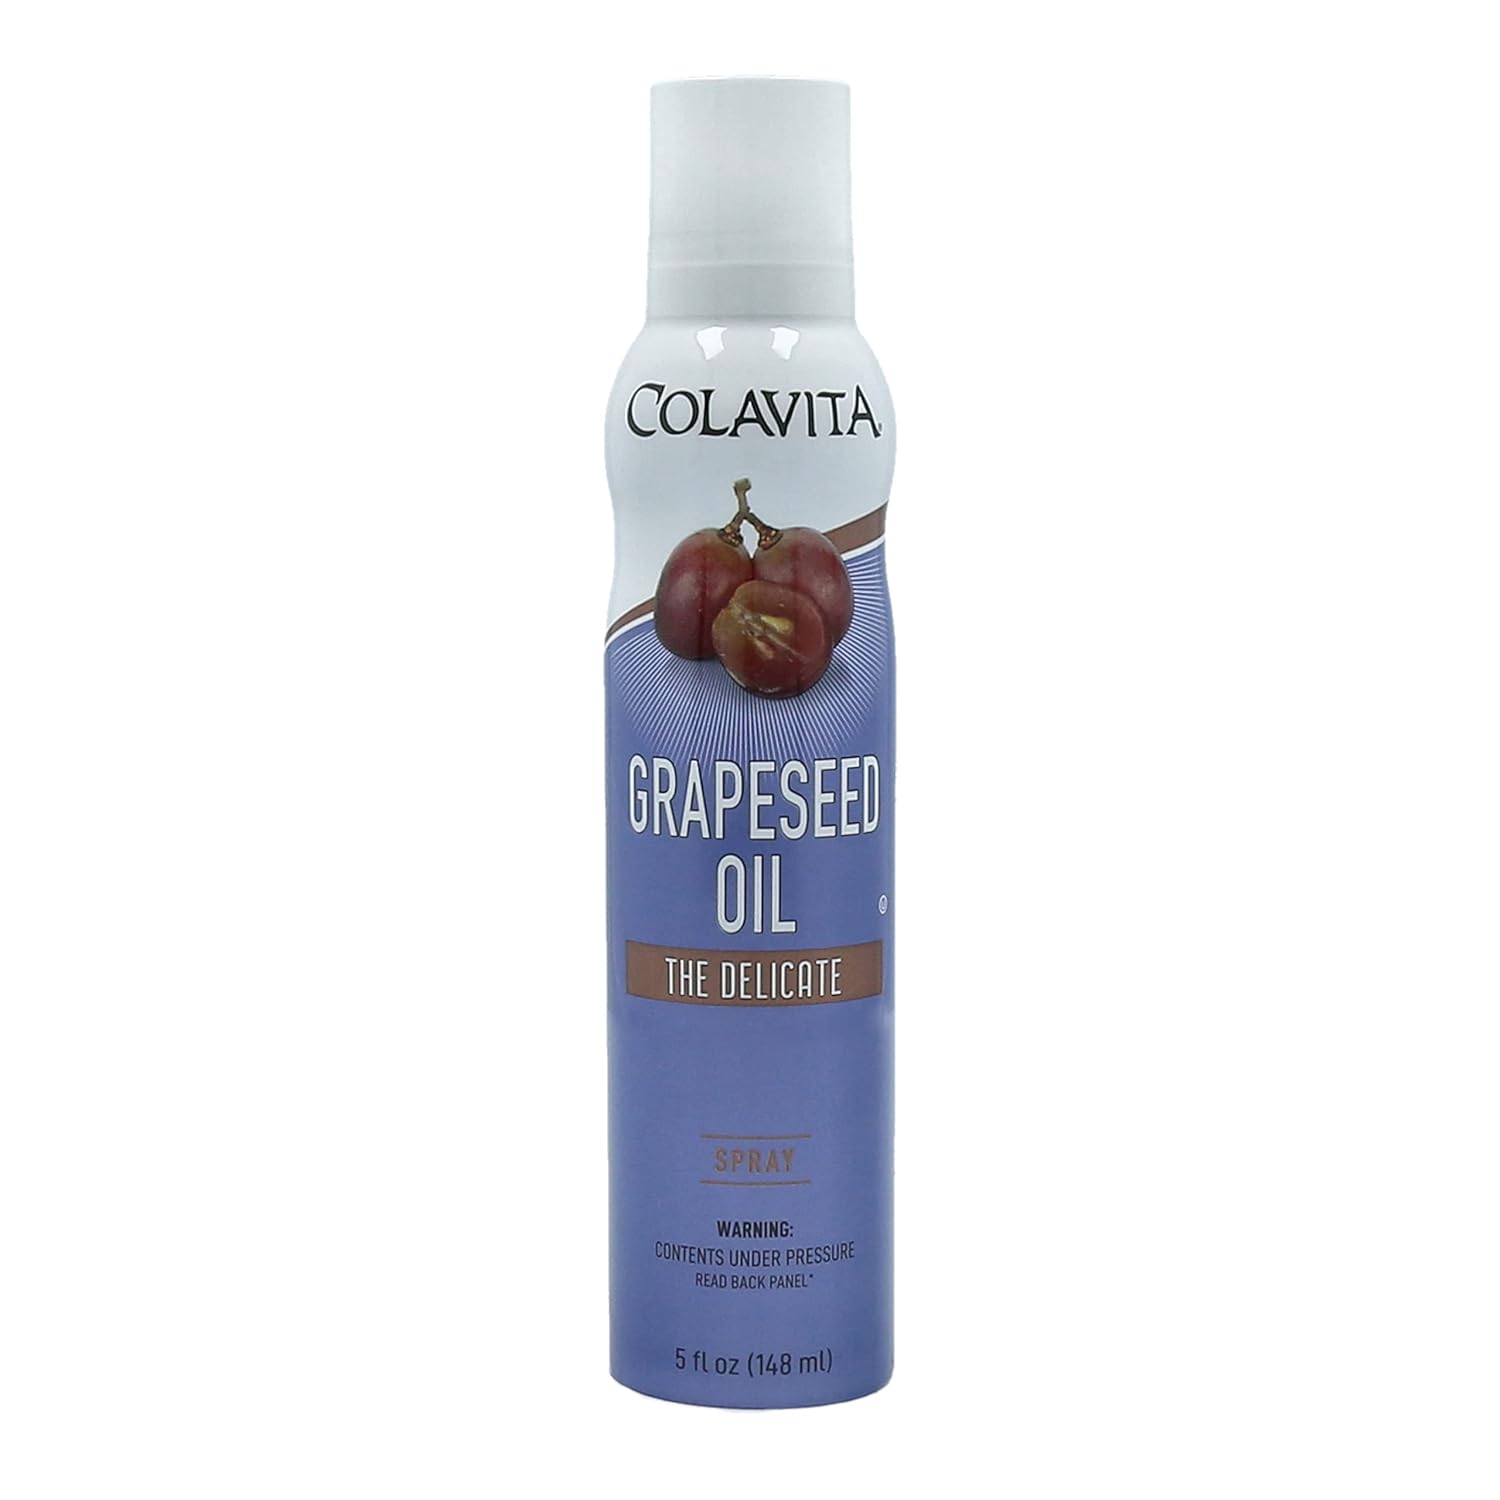 Colavita Spray Oils - Grapeseed Oil Spray, 5oz (148ml) Can | 100% Grapeseed Oil, Clean and Delicate Taste, High Smoke Point, Ideal for Salads, Baking, Frying